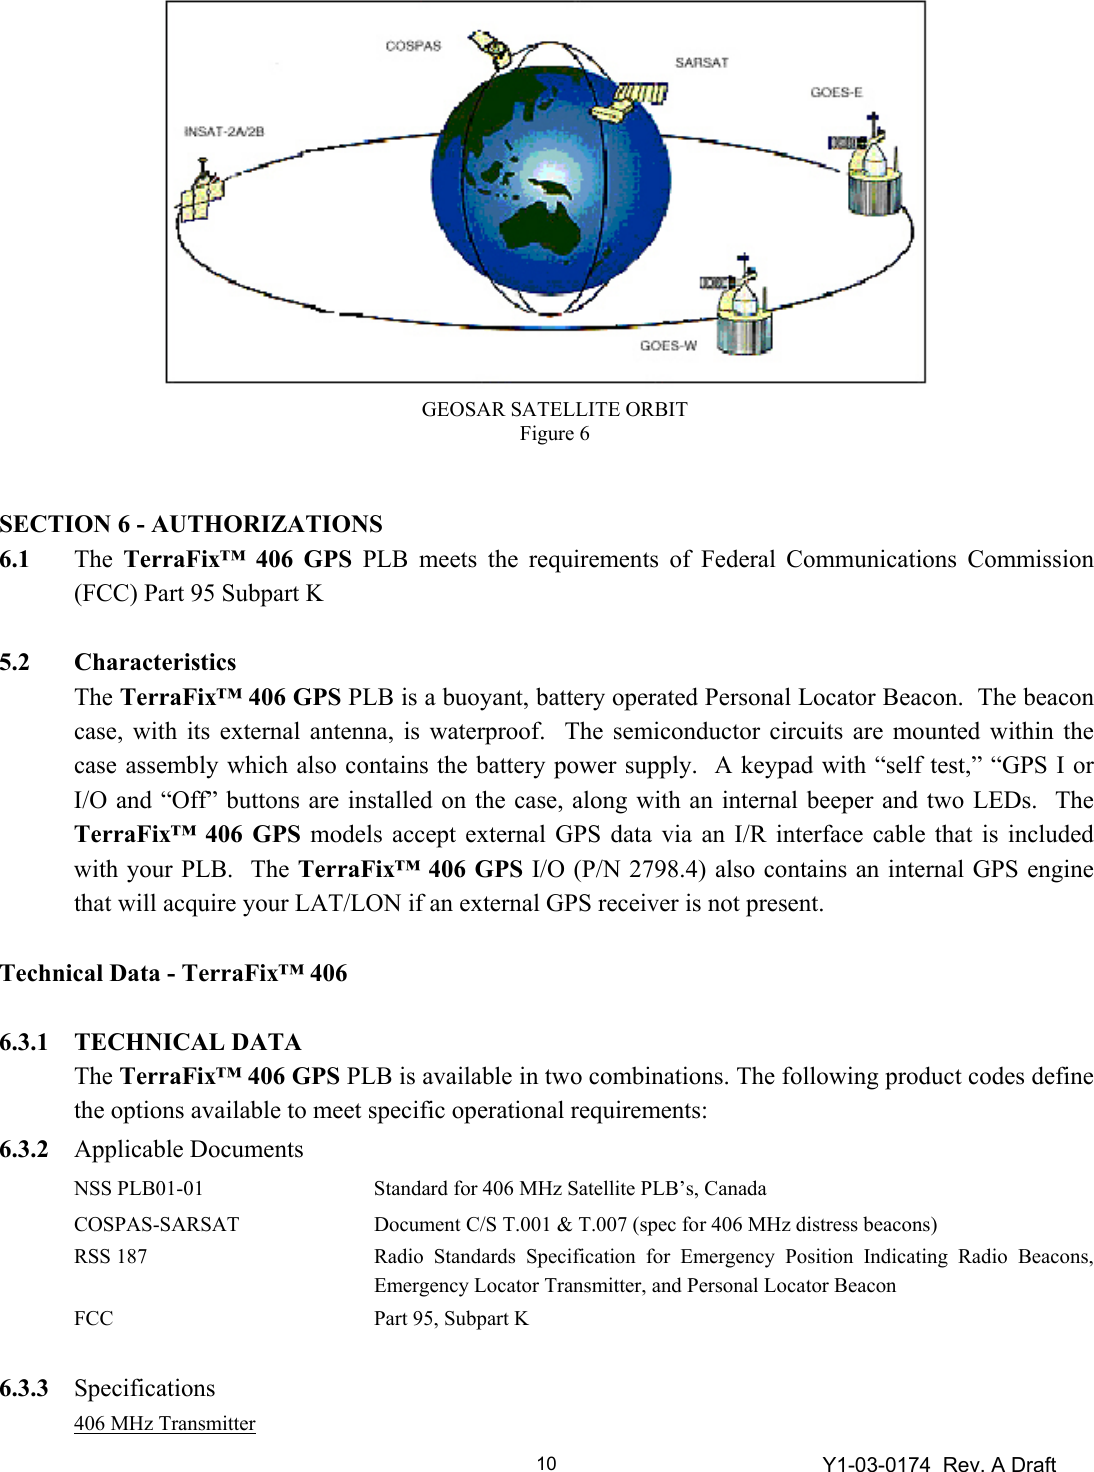 Y1-03-0174  Rev. A Draft 10               SECTION 6 - AUTHORIZATIONS 6.1 The TerraFix™ 406 GPS PLB meets the requirements of Federal Communications Commission (FCC) Part 95 Subpart K   5.2 Characteristics  The TerraFix™ 406 GPS PLB is a buoyant, battery operated Personal Locator Beacon.  The beacon case, with its external antenna, is waterproof.  The semiconductor circuits are mounted within the case assembly which also contains the battery power supply.  A keypad with “self test,” “GPS I or I/O and “Off” buttons are installed on the case, along with an internal beeper and two LEDs.  The TerraFix™ 406 GPS models accept external GPS data via an I/R interface cable that is included with your PLB.  The TerraFix™ 406 GPS I/O (P/N 2798.4) also contains an internal GPS engine that will acquire your LAT/LON if an external GPS receiver is not present.  Technical Data - TerraFix™ 406  6.3.1 TECHNICAL DATA   The TerraFix™ 406 GPS PLB is available in two combinations. The following product codes define the options available to meet specific operational requirements:  6.3.2 Applicable Documents  NSS PLB01-01  Standard for 406 MHz Satellite PLB’s, Canada  COSPAS-SARSAT  Document C/S T.001 &amp; T.007 (spec for 406 MHz distress beacons)  RSS 187 Radio Standards Specification for Emergency Position Indicating Radio Beacons, Emergency Locator Transmitter, and Personal Locator Beacon   FCC  Part 95, Subpart K  6.3.3 Specifications  406 MHz Transmitter GEOSAR SATELLITE ORBIT Figure 6 